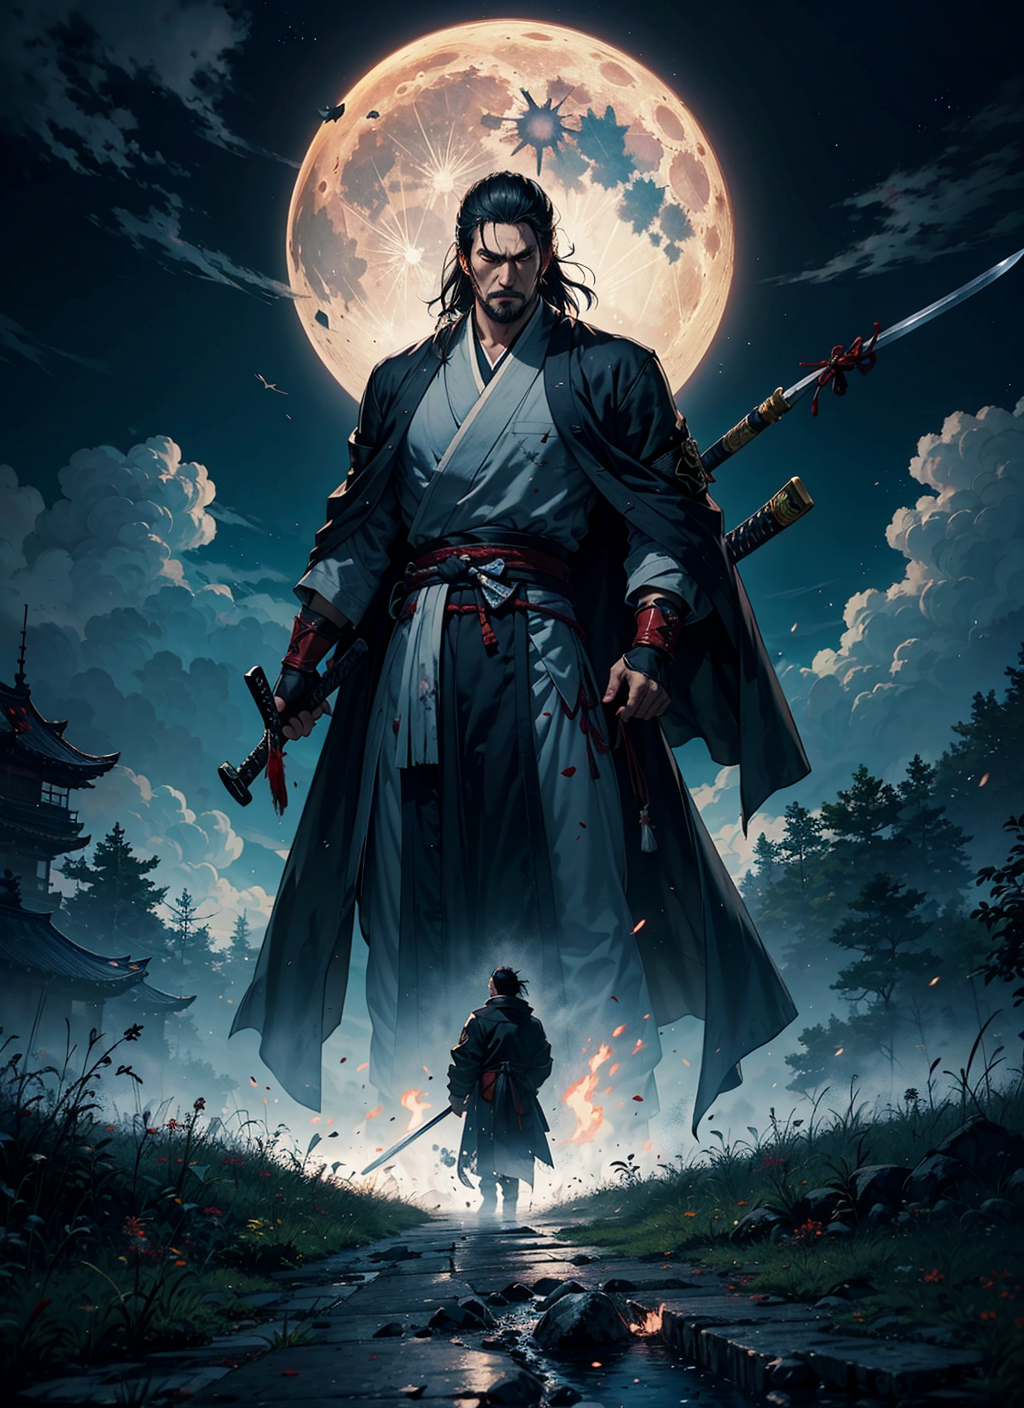 Isshin, the Sword Saint is a legendary warrior and the founder of the Ashina Clan. He is an old man with white hair and be...